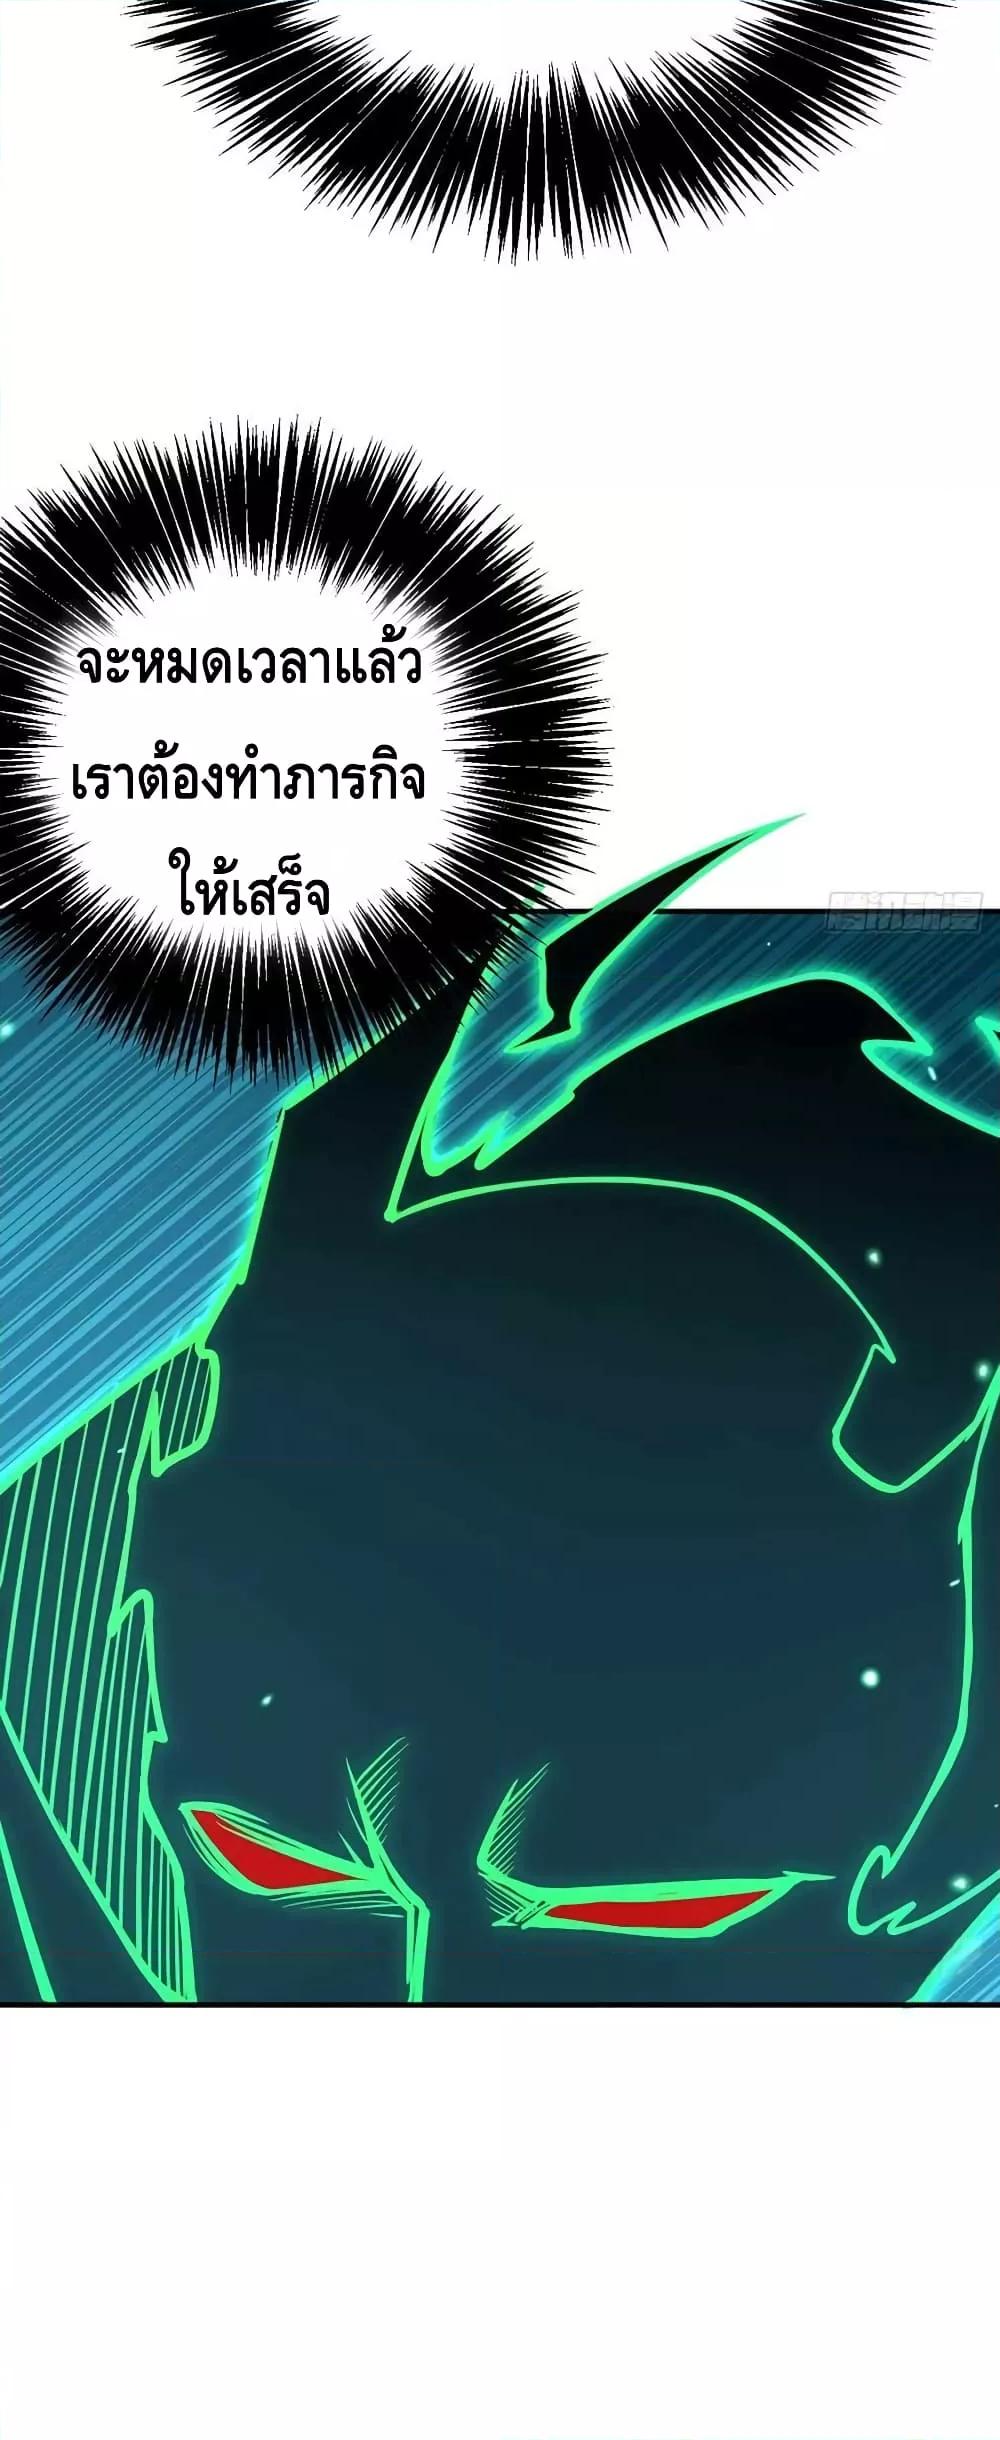 After Signing In For 30 Days, I Can Annihilate Stars ตอนที่ 53 (4)